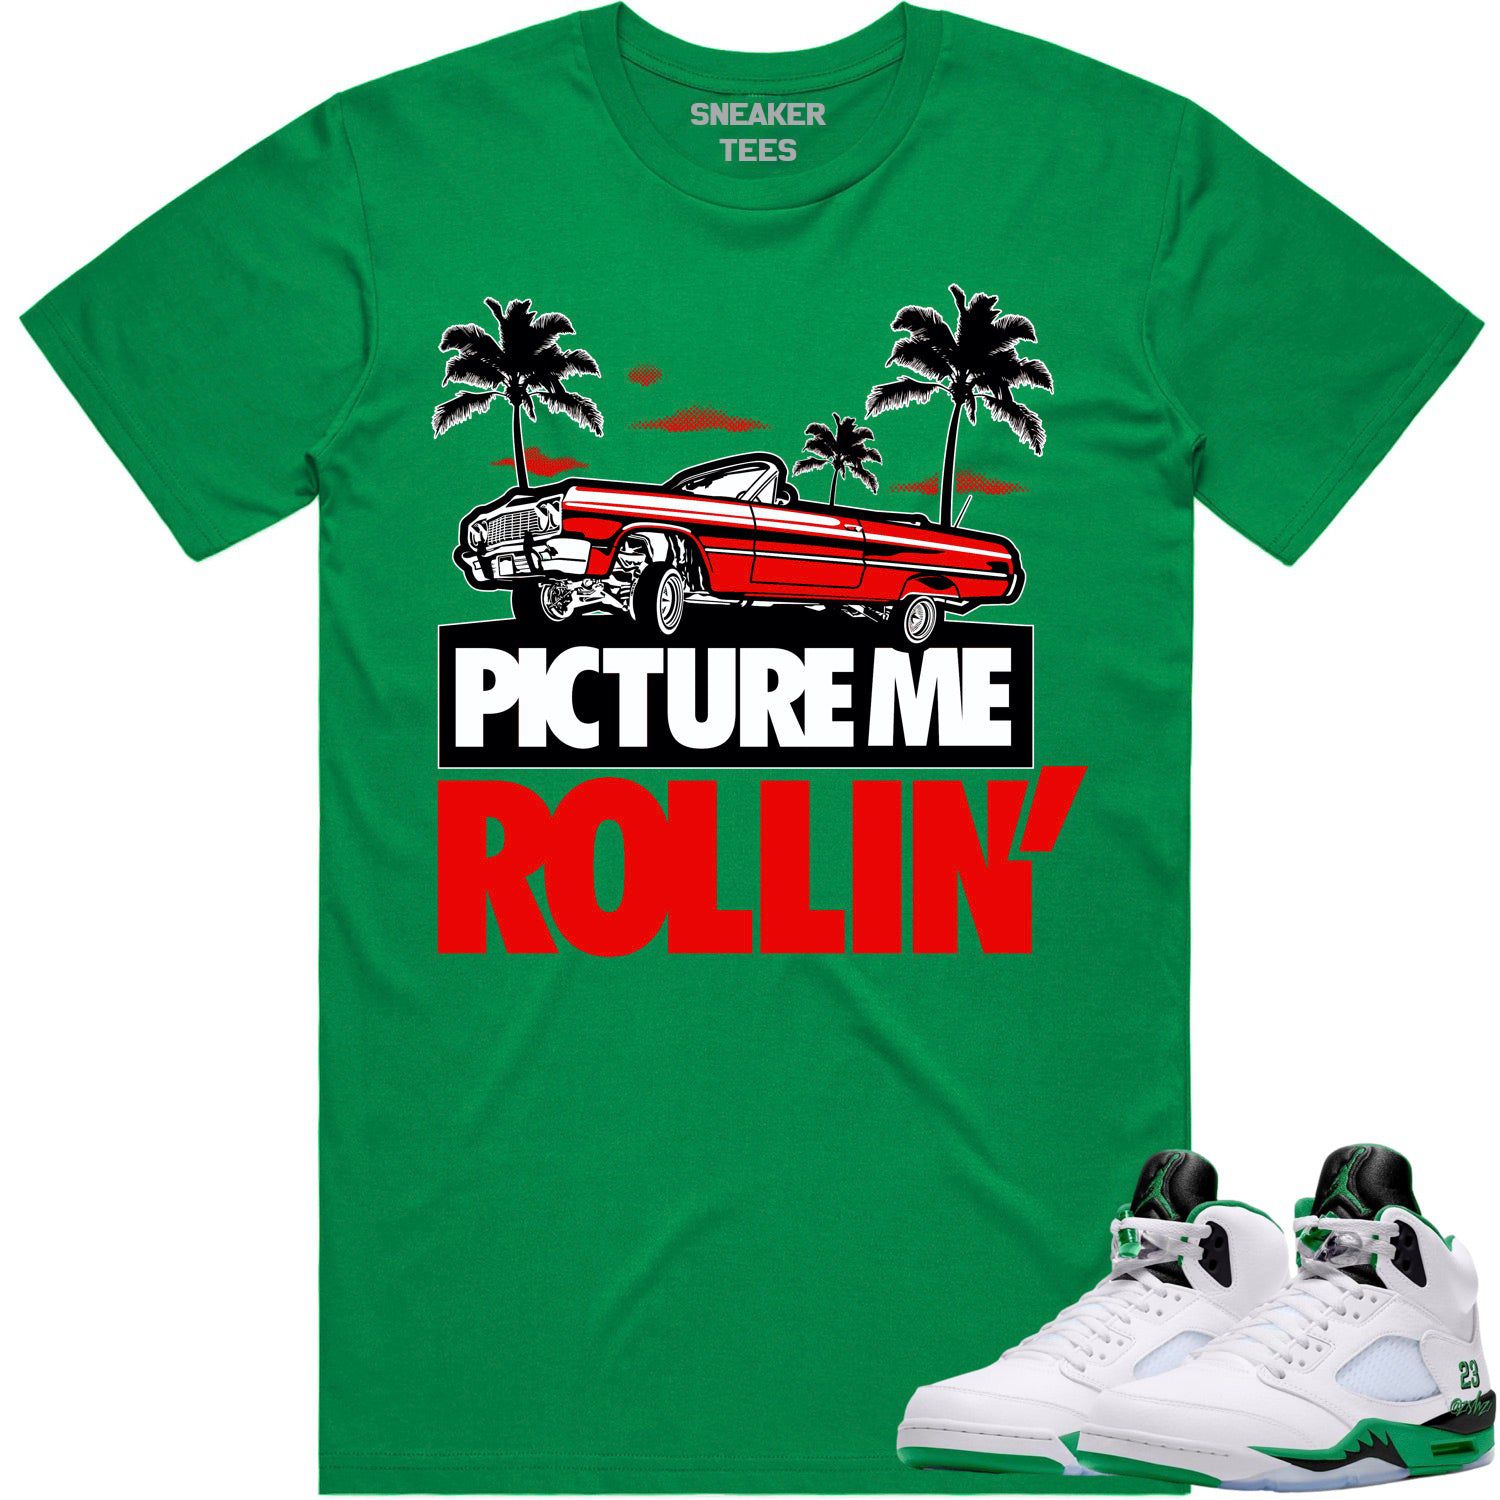 Penny 1 Stadium Green 1s Shirt - Sneaker Tees - Red Picture